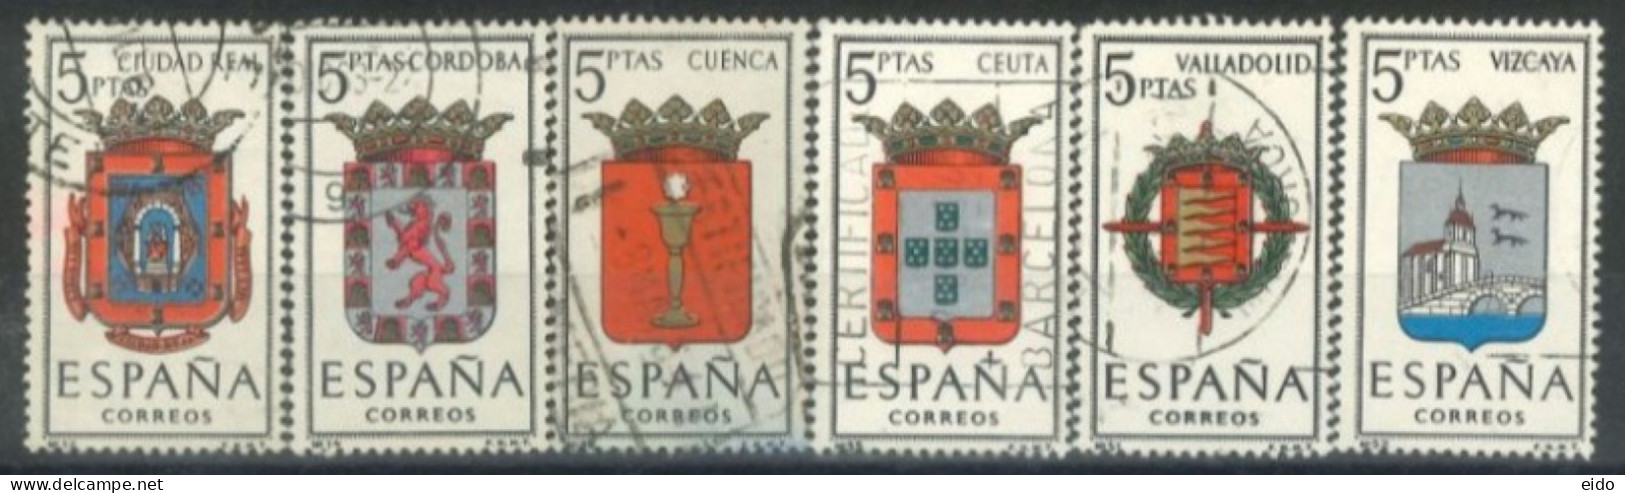 SPAIN,  1963/66, PROVINCIAL ARMS STAMPS SET OF 6, USED. - Used Stamps